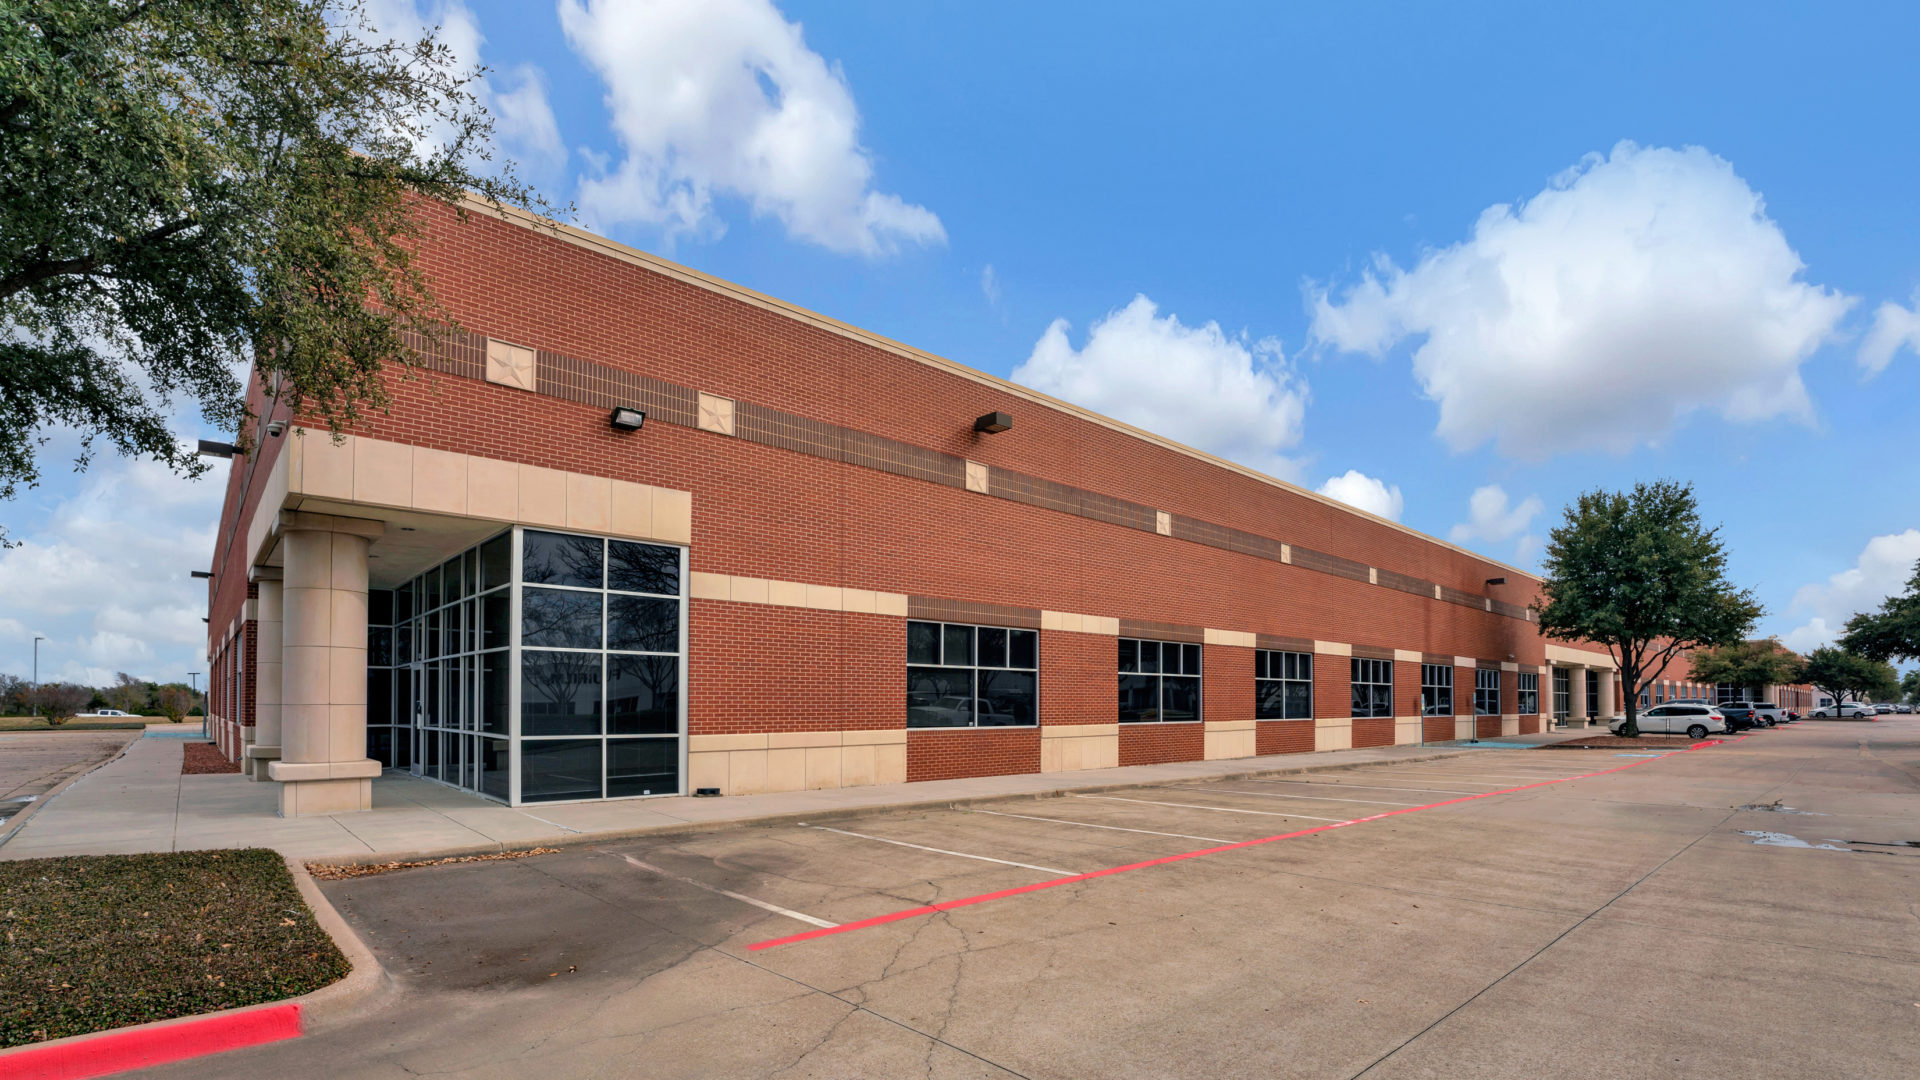 Corner view of 4040 Royal Lane, an industrial property owned by Fort Capital and located in Irving, TX